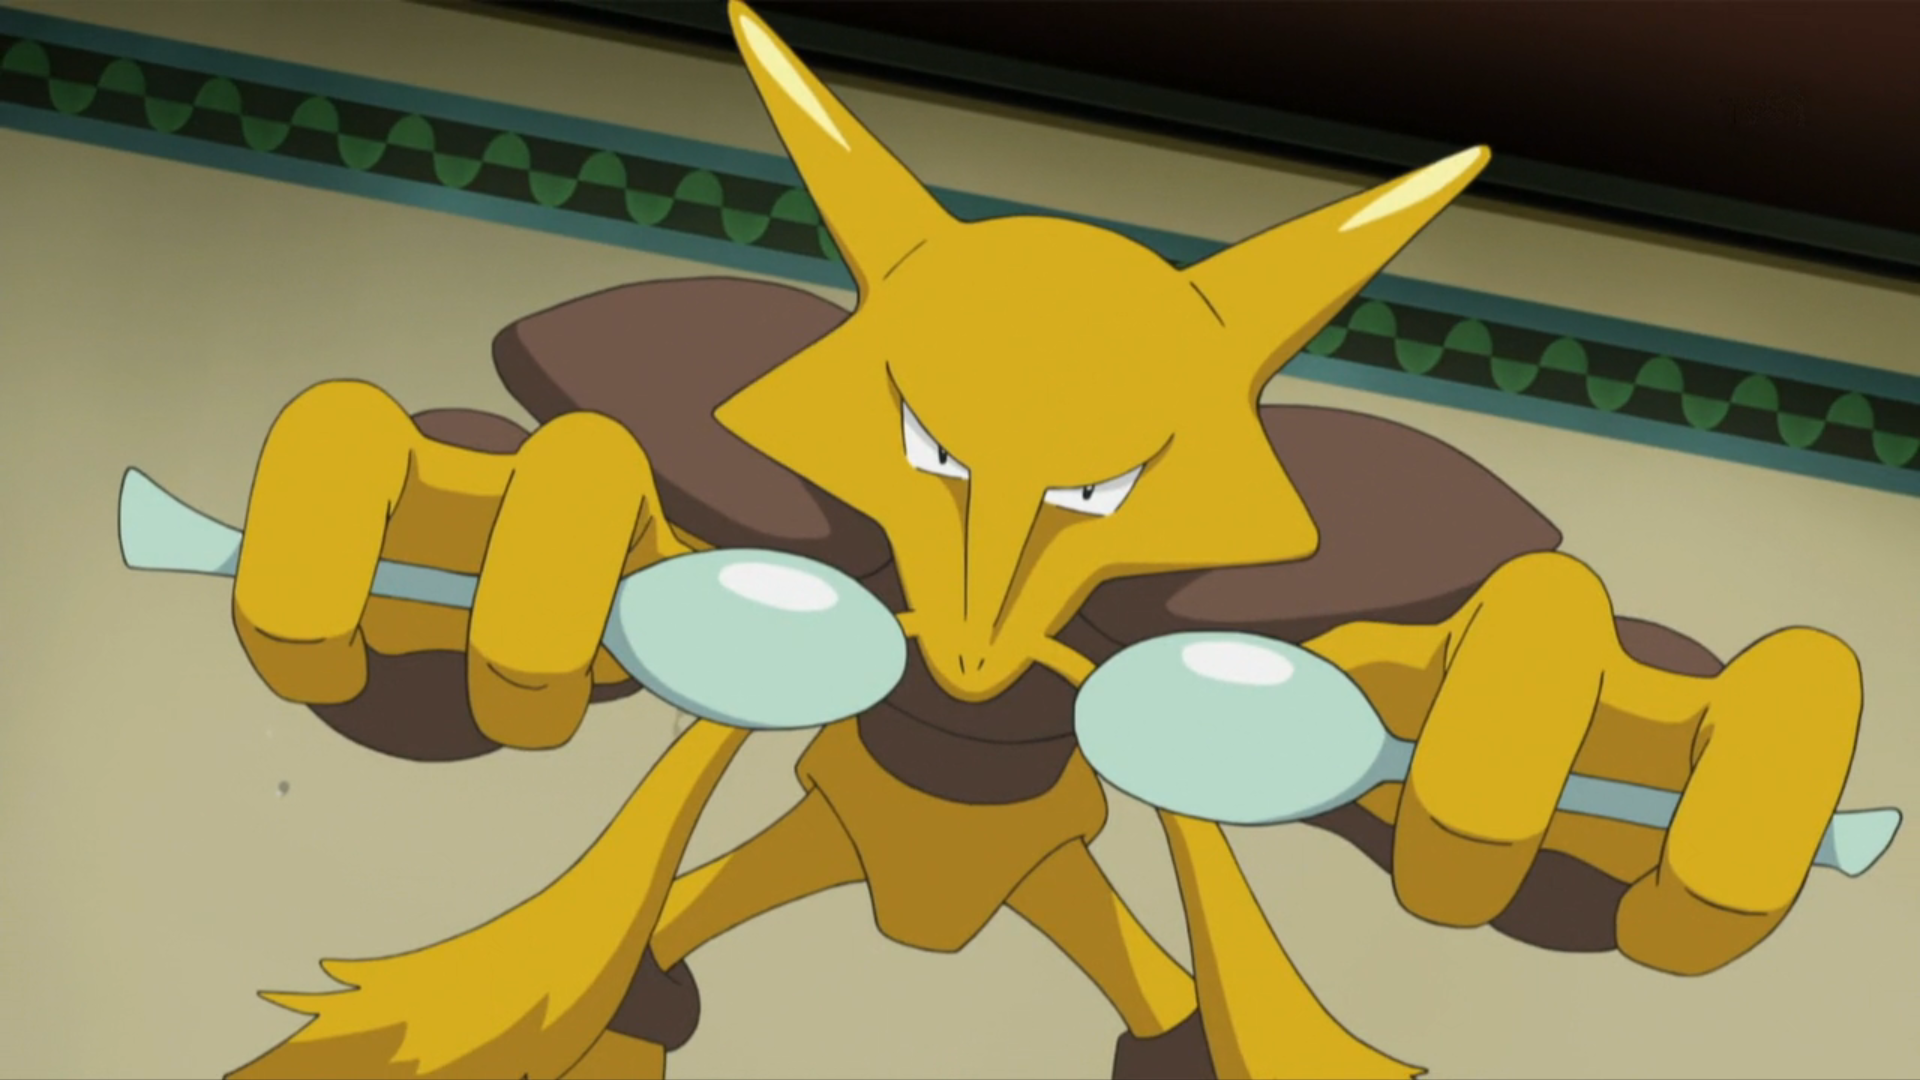 Alakazam Psychic Pokemon Weaknesses, Strengths and What's Good Against Them